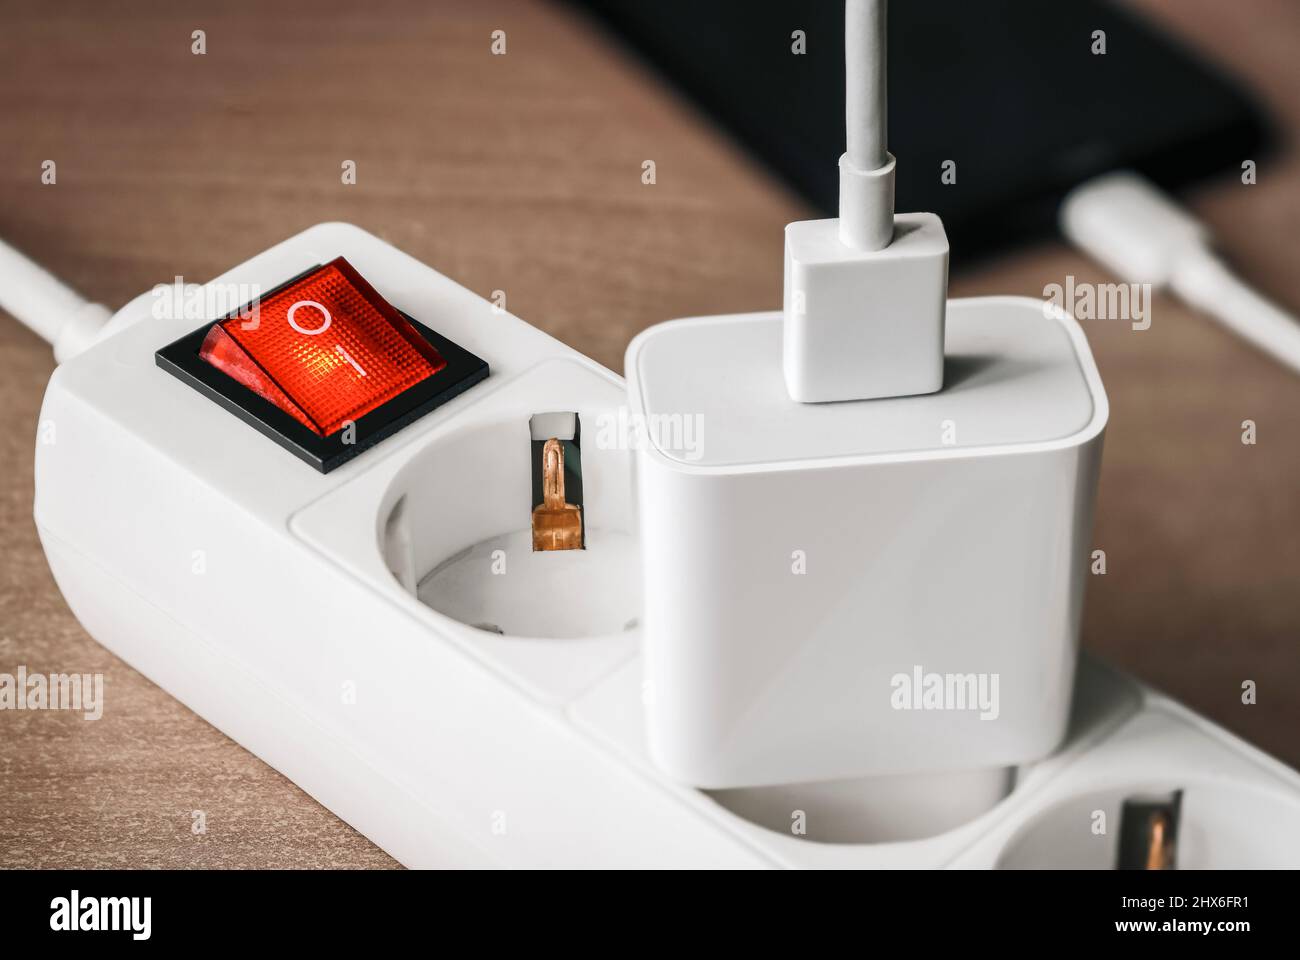 A charger adapter with a USB cable connected to a power supply with a red switch for charging a smartphone. Stock Photo